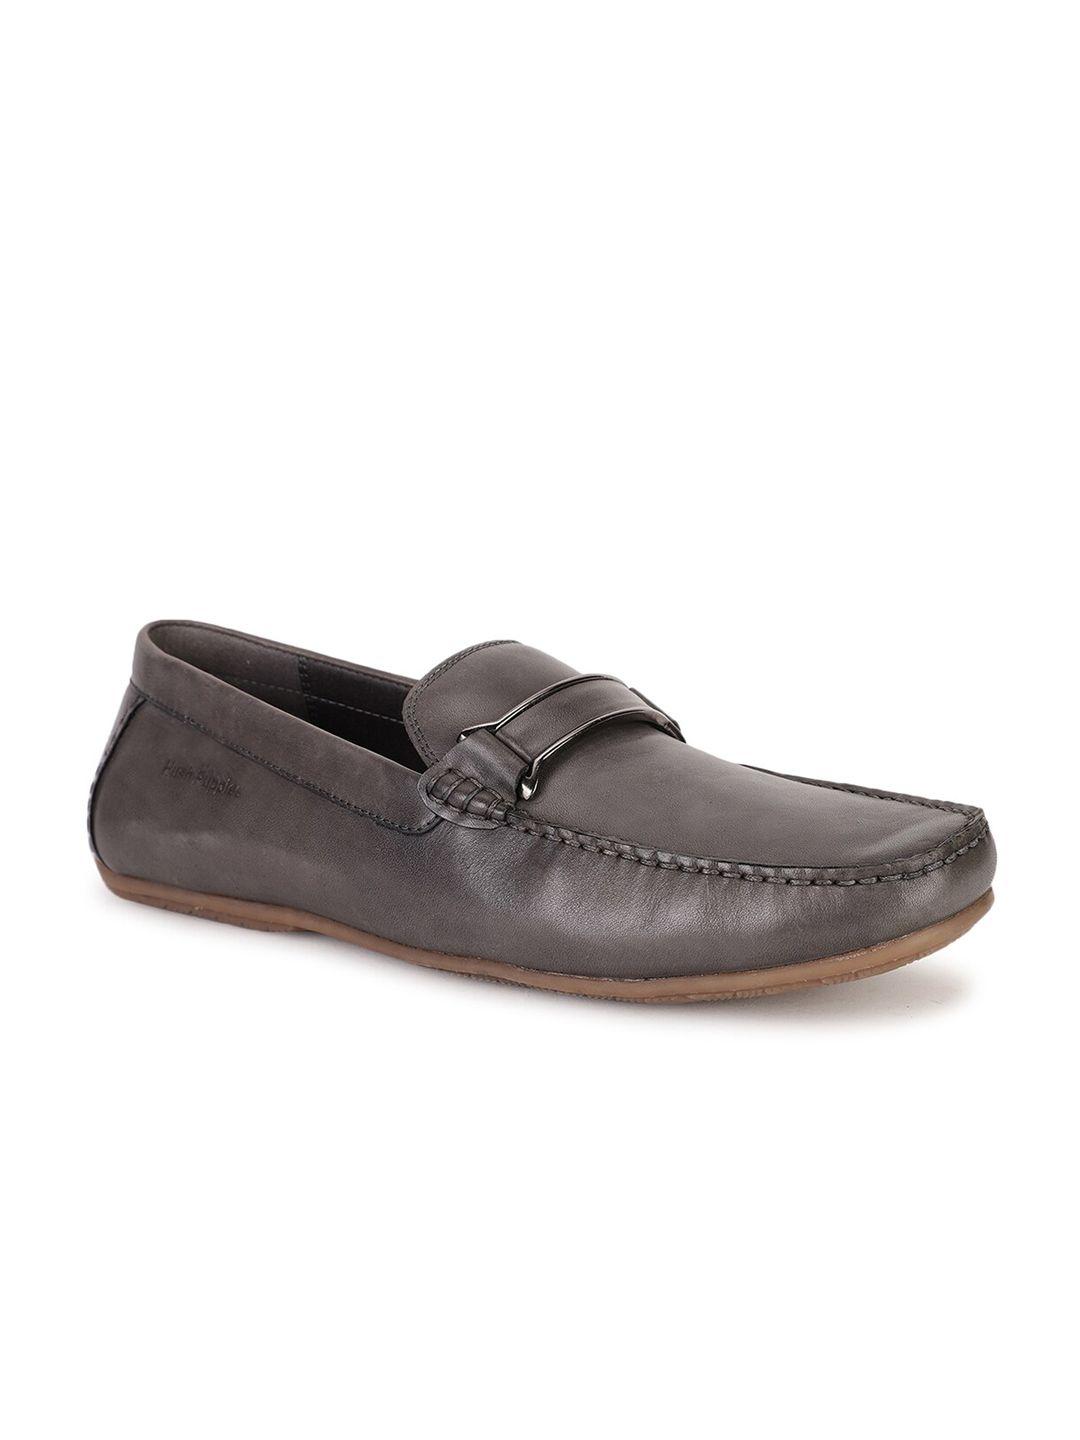 hush puppies men grey leather loafers